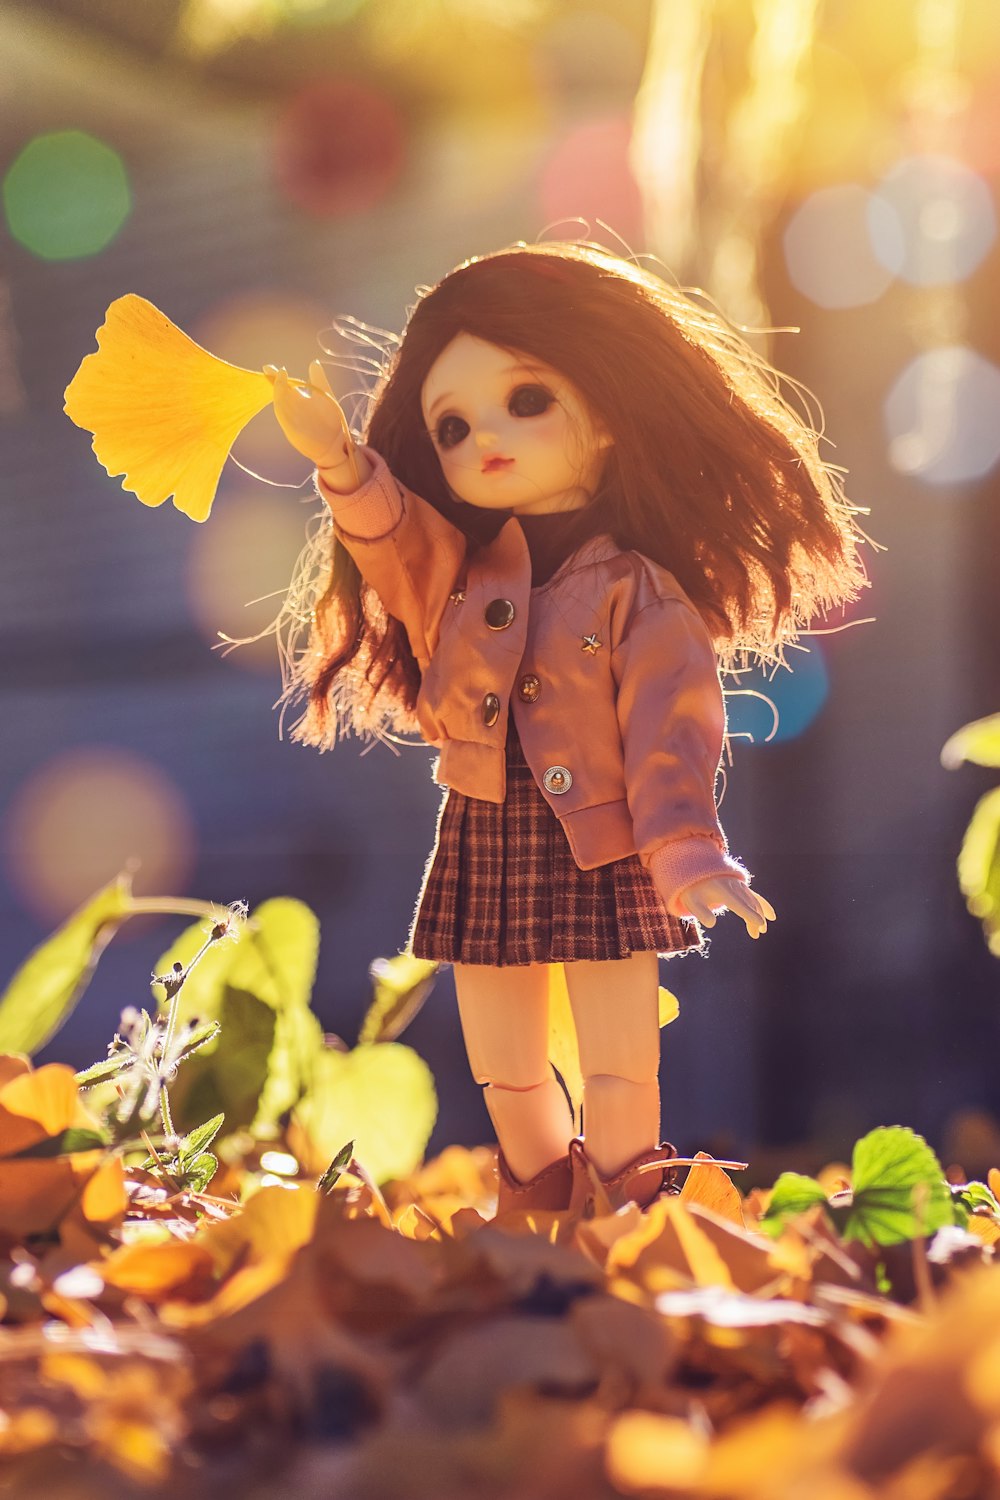 100 Doll Pictures Download Free Images On Unsplash